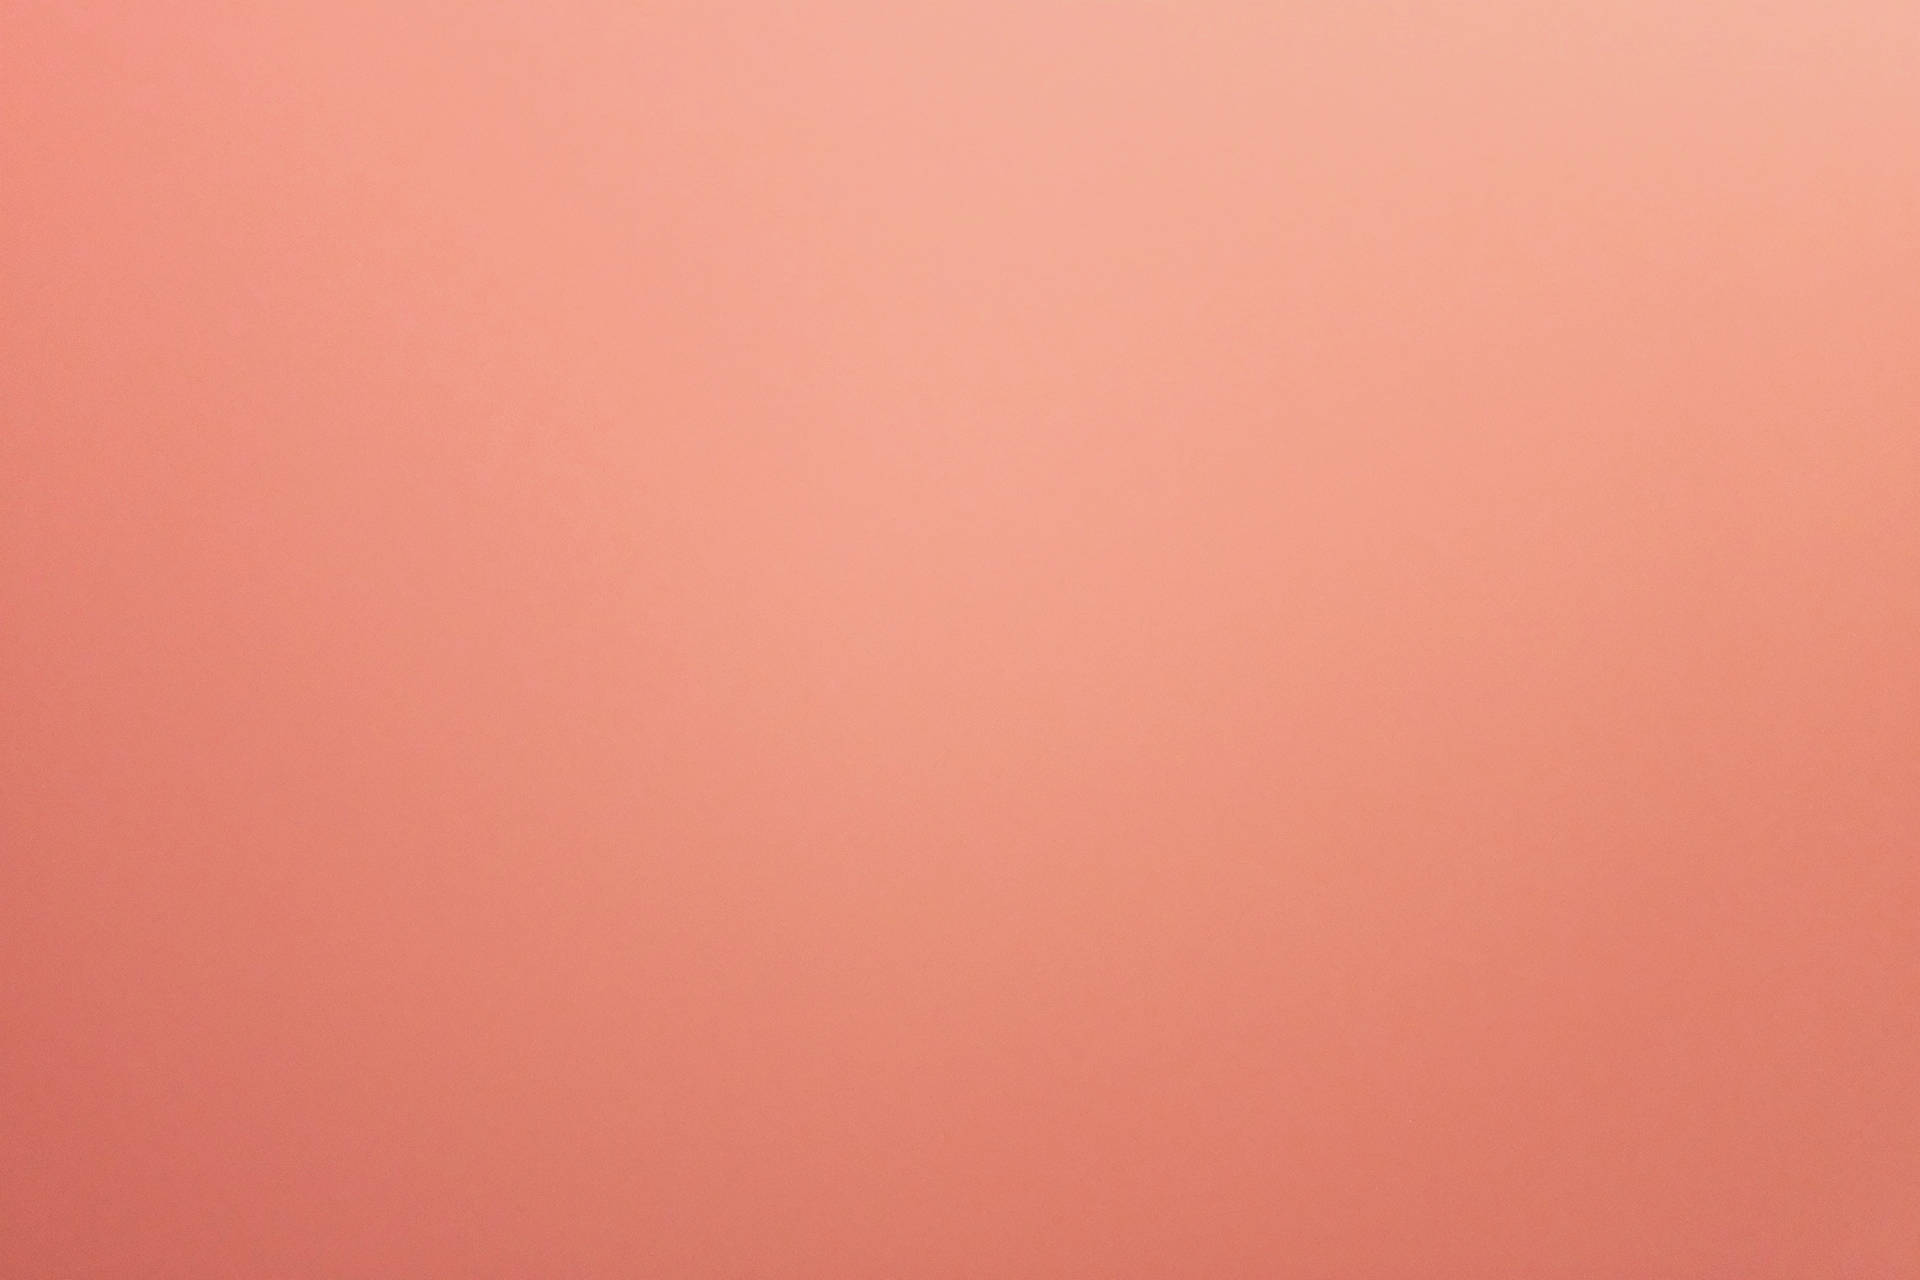 3832X2554 Gradient Wallpaper and Background